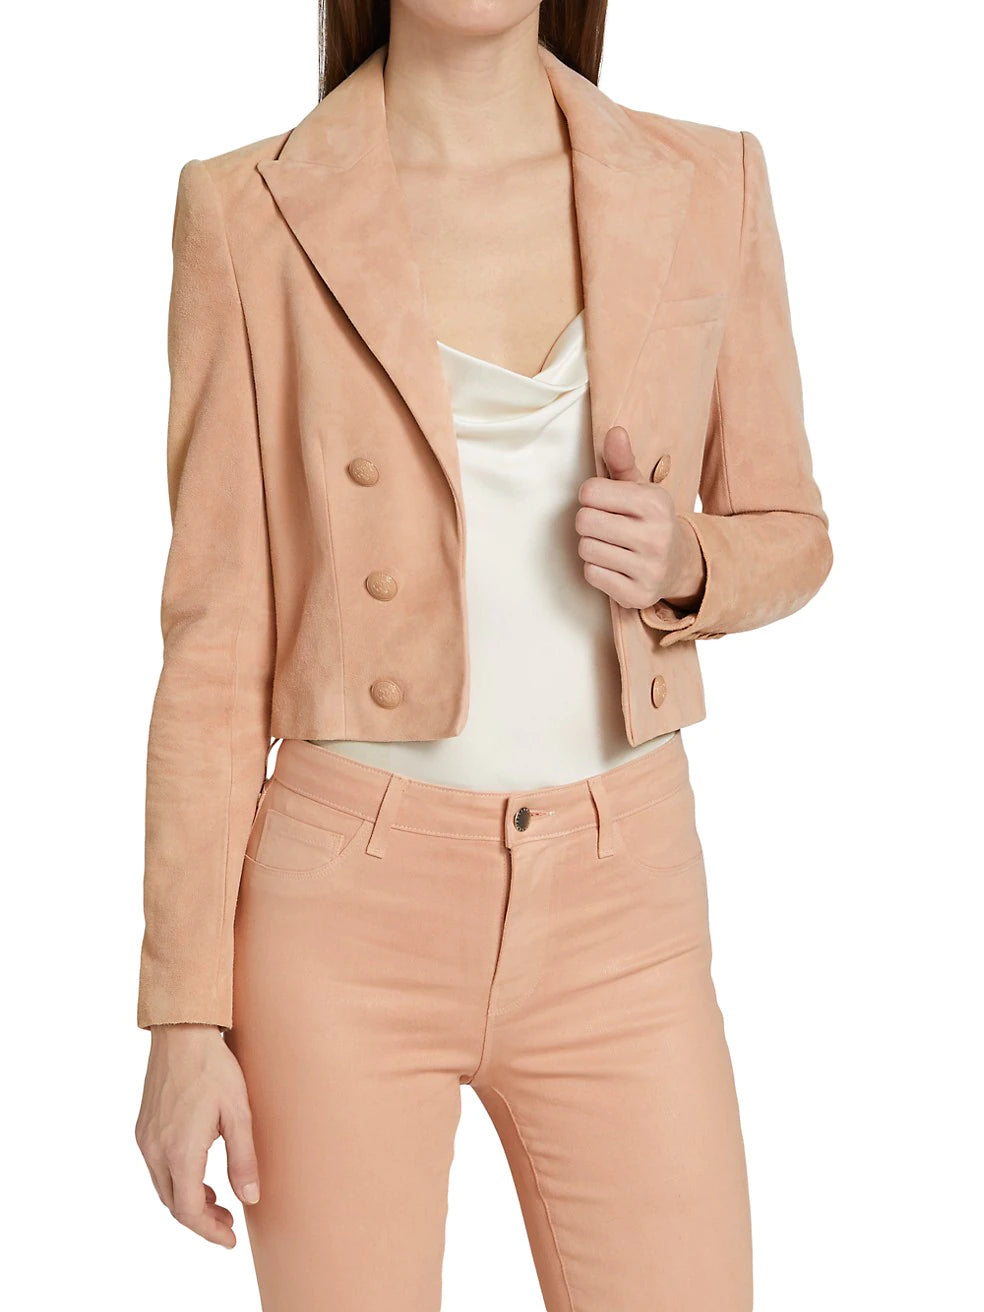 Real Suede Cropped Blazer For Women New Stylish look Leather Jacket